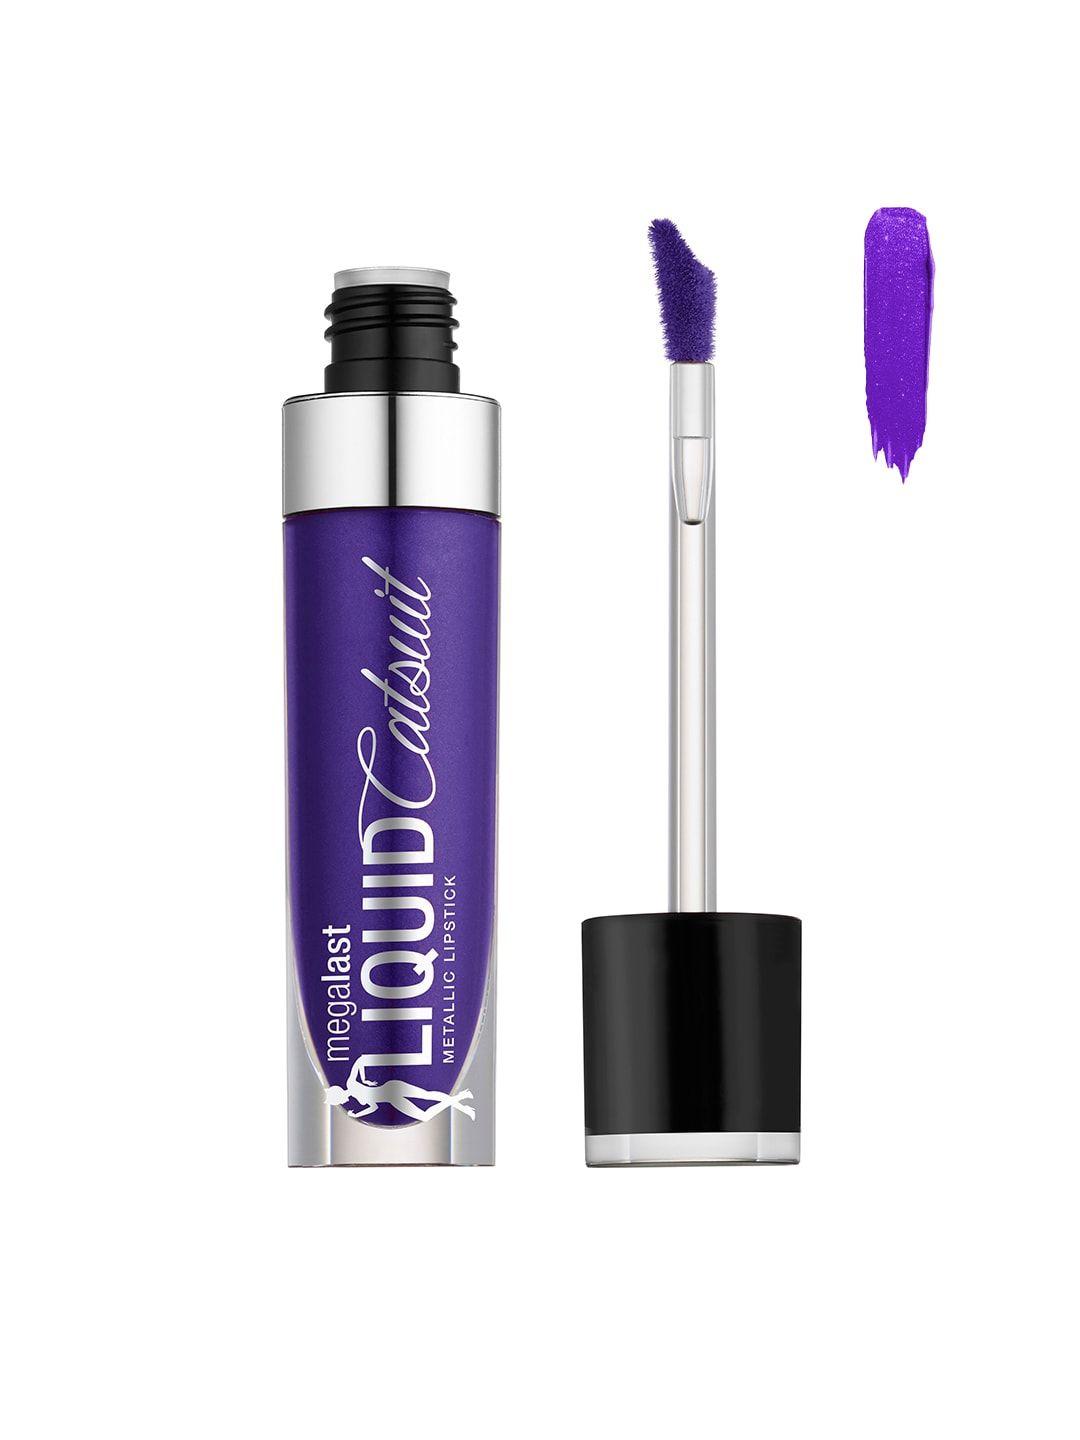 wet n wild sustainable megalast liquid catsuit metallic lipstick - bewitched 5.7g